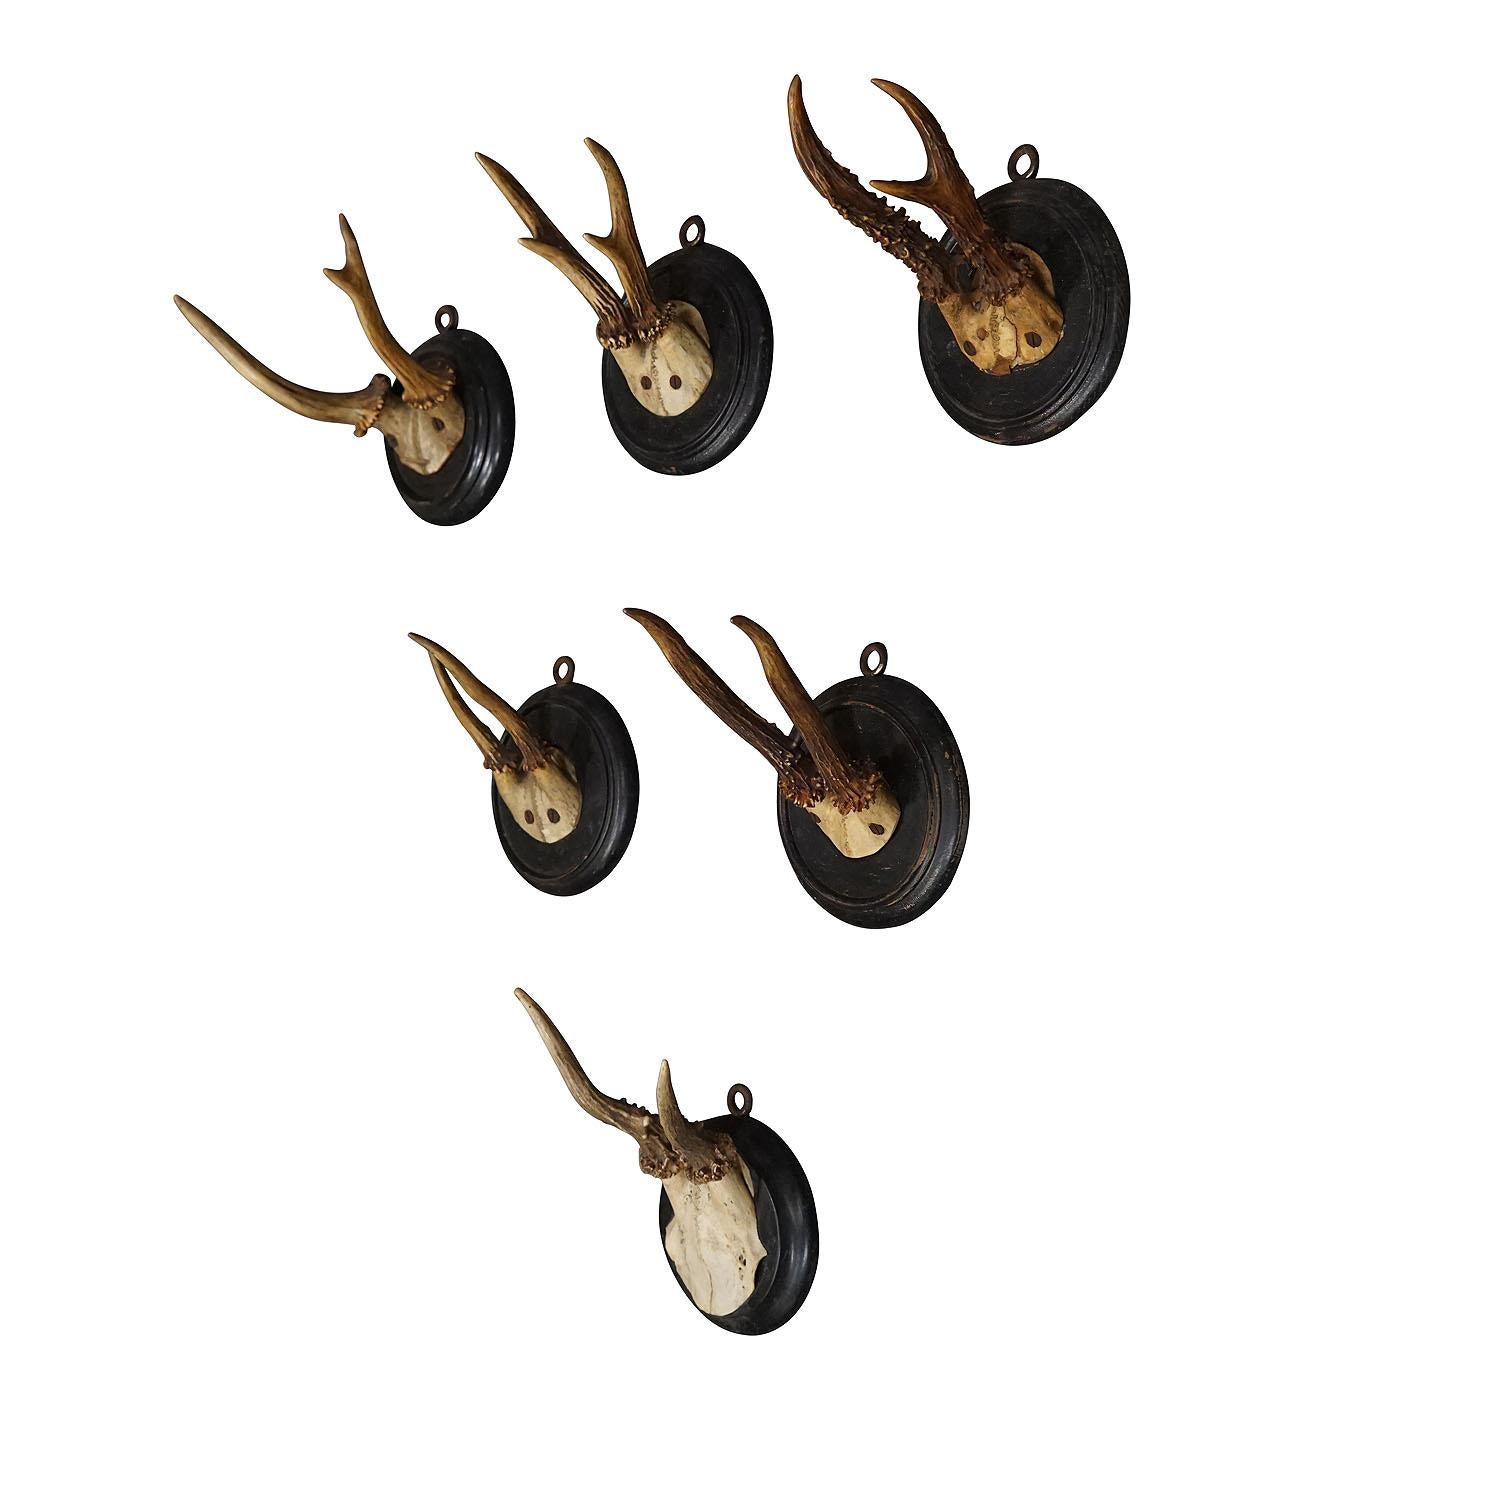 Six antique deer trophies on wooden plaques Germany ca. 1900s.

A set of six antique Black Forest deer trophies on turned wooden plaques with black finish. Some with brand stamp on the back of the plaque featuring the shortcut of the hunters name.